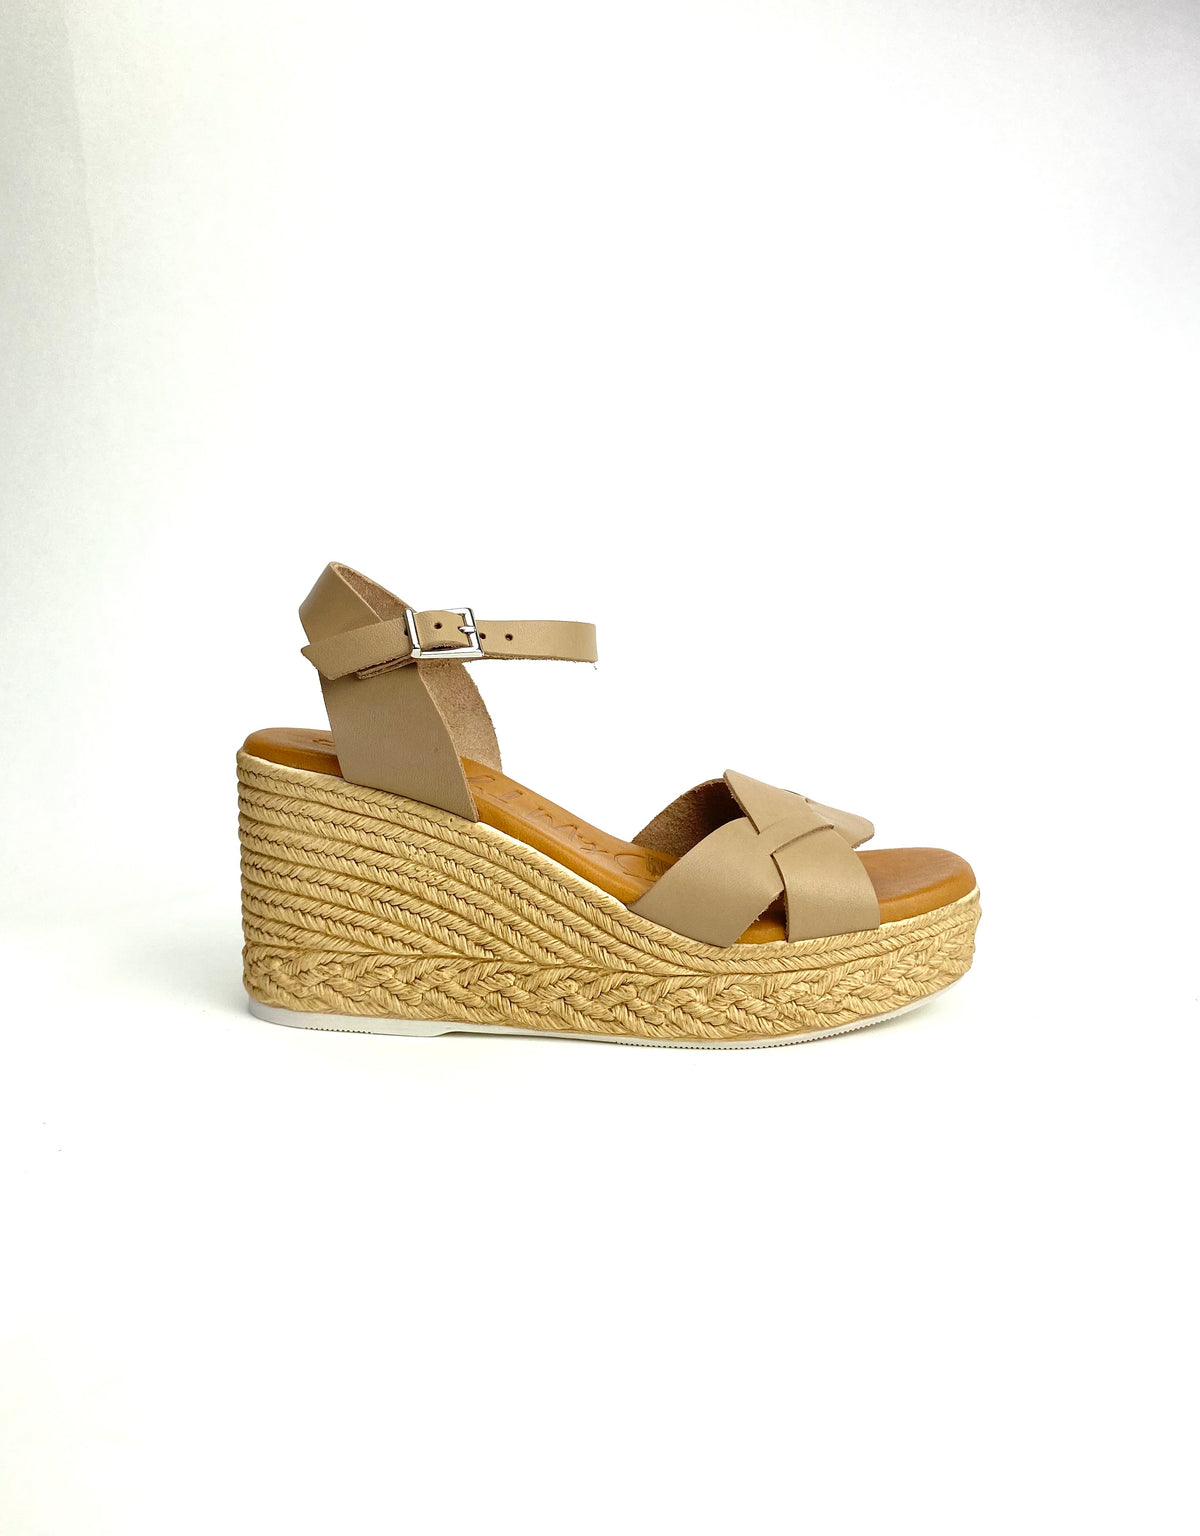 Oh My Sandals - 5460 Taupe Wedge Sandal